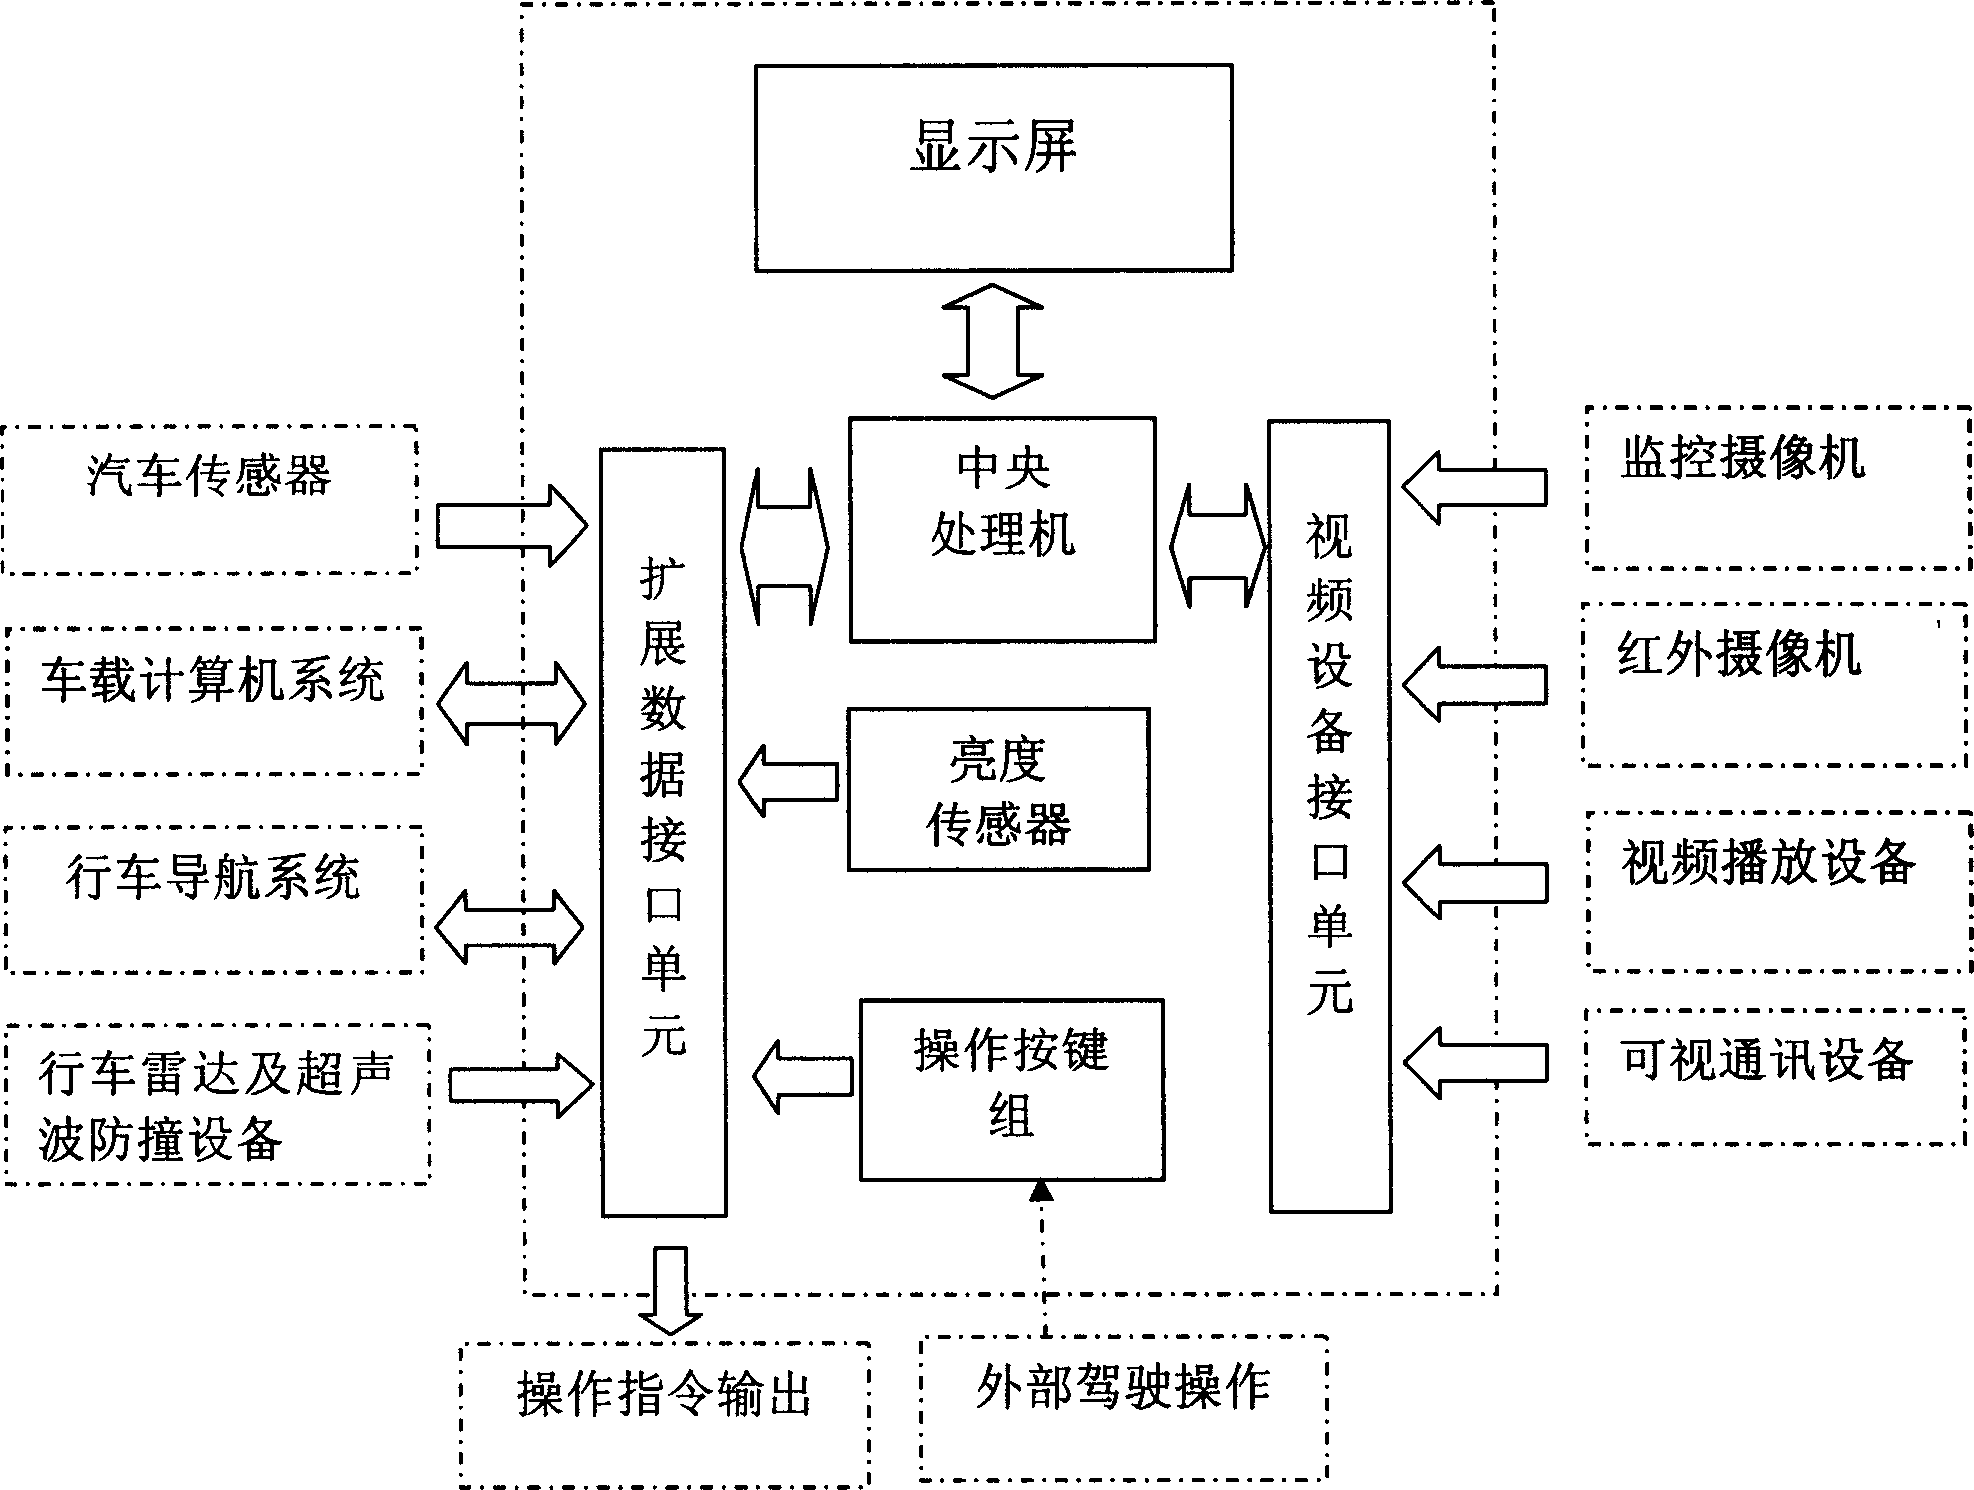 Integral display and operation system of vehicle cab